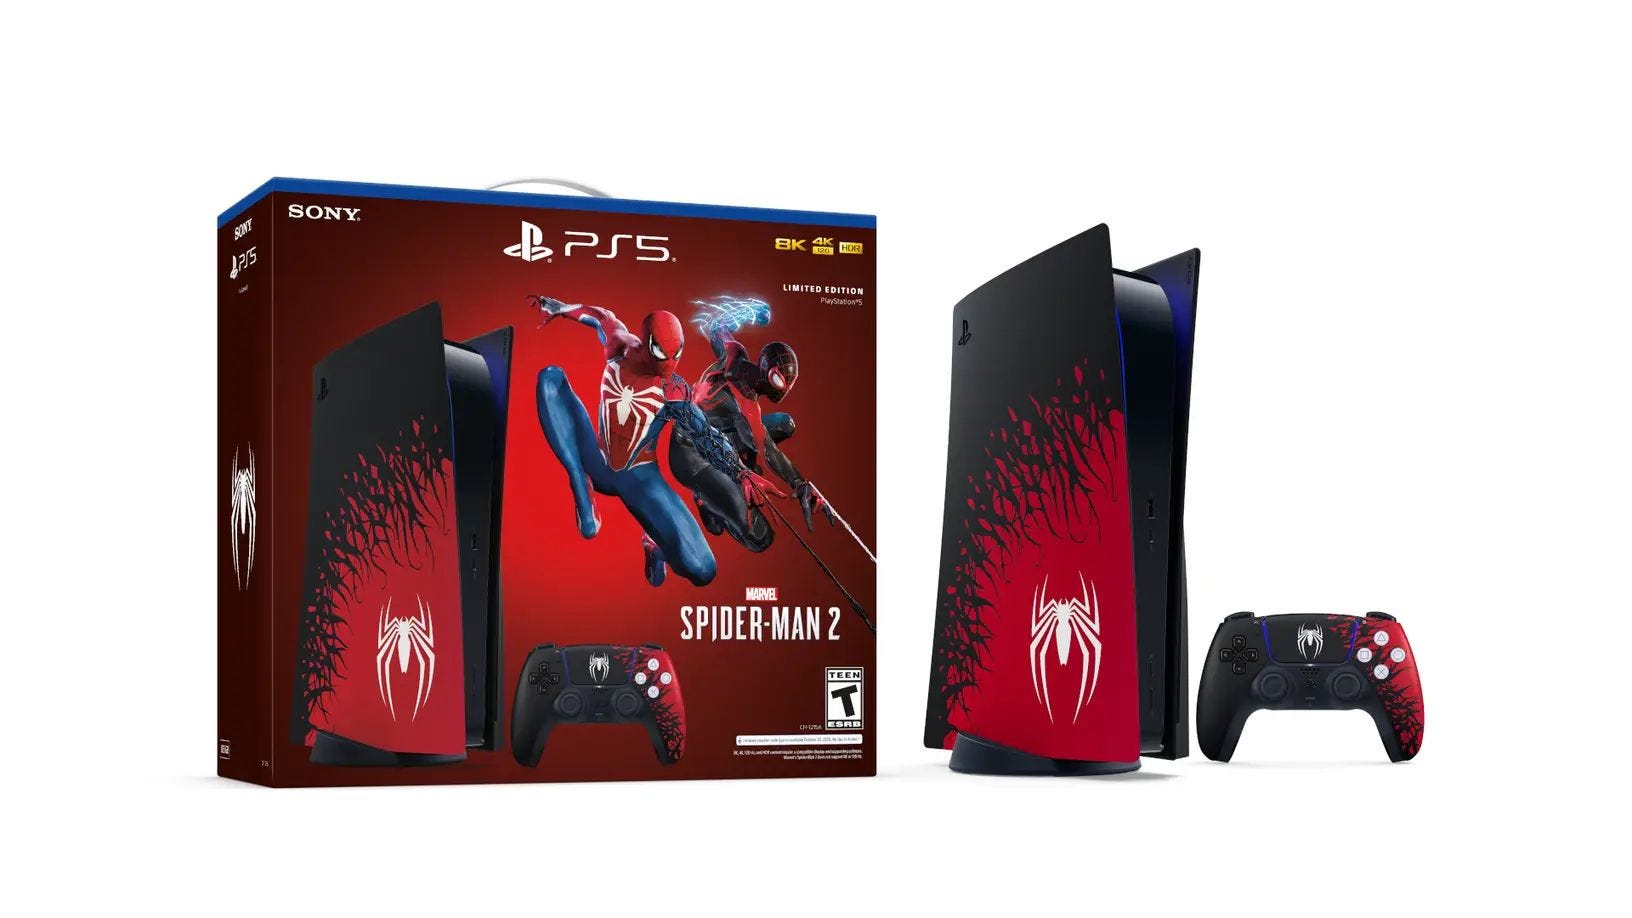 SpiderMan 2 PS5 bundle price, release date, restock alerts and where